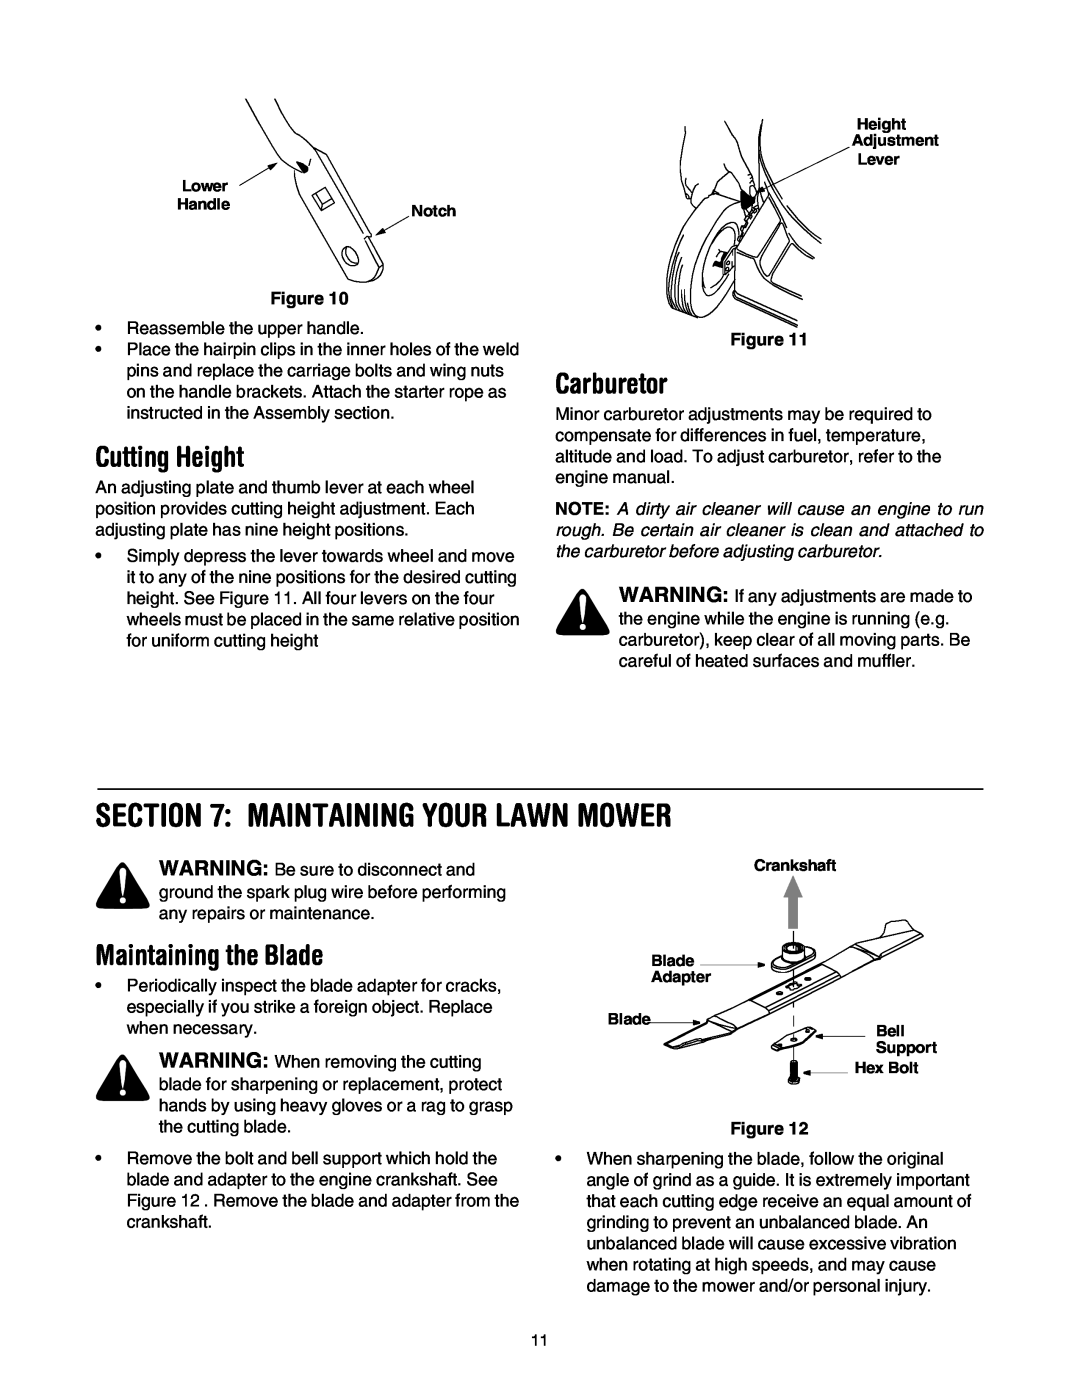 Bolens 416 manual Maintaining Your Lawn Mower, Cutting Height, Carburetor, Maintaining the Blade 